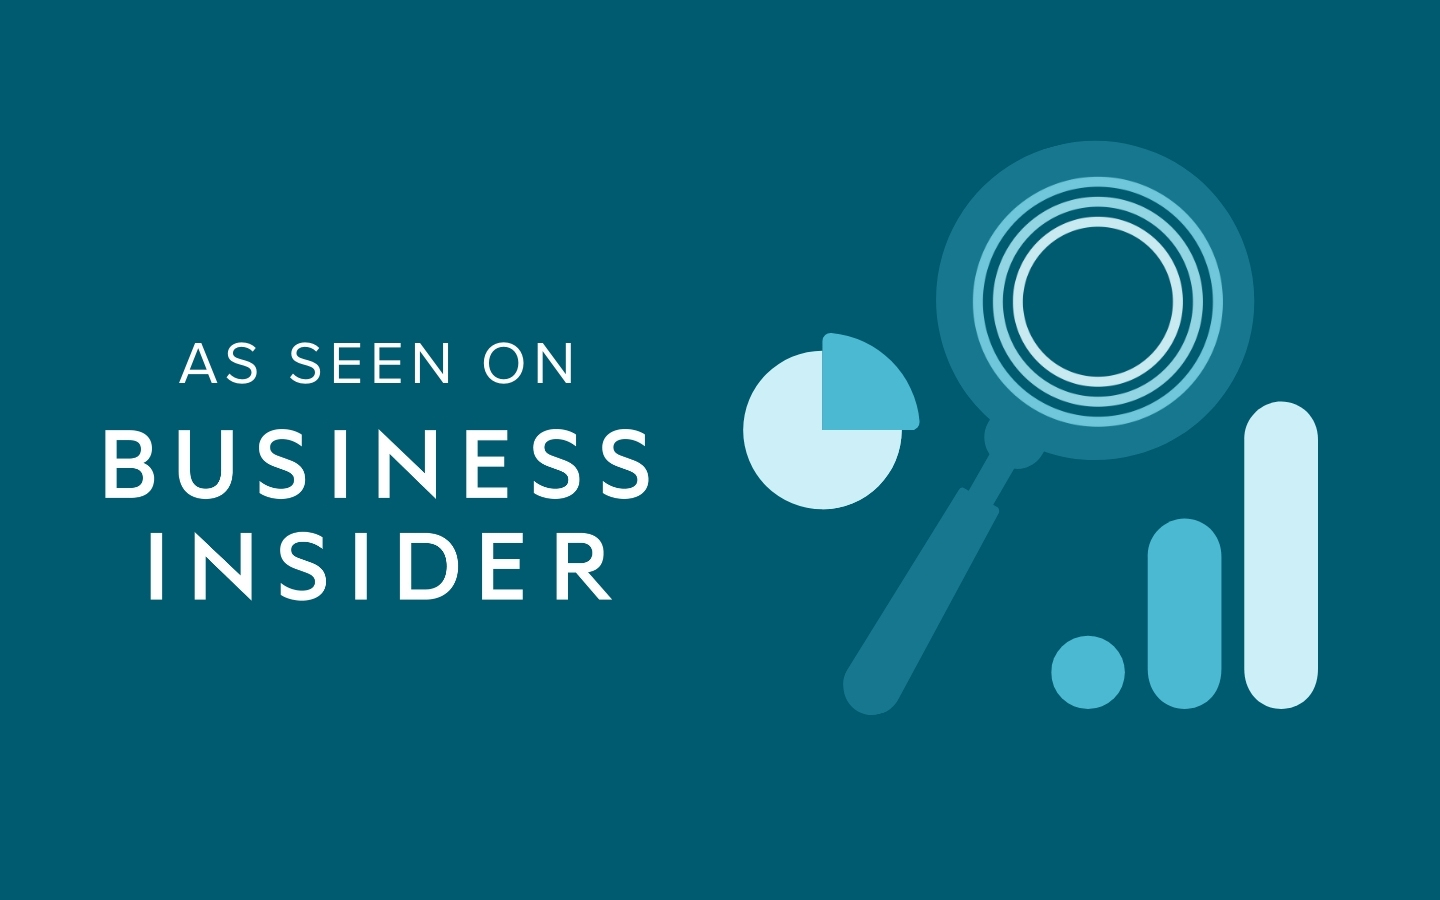 As Seen on Business Insider with teal background, pie chart, magnifying glass, and bar chart